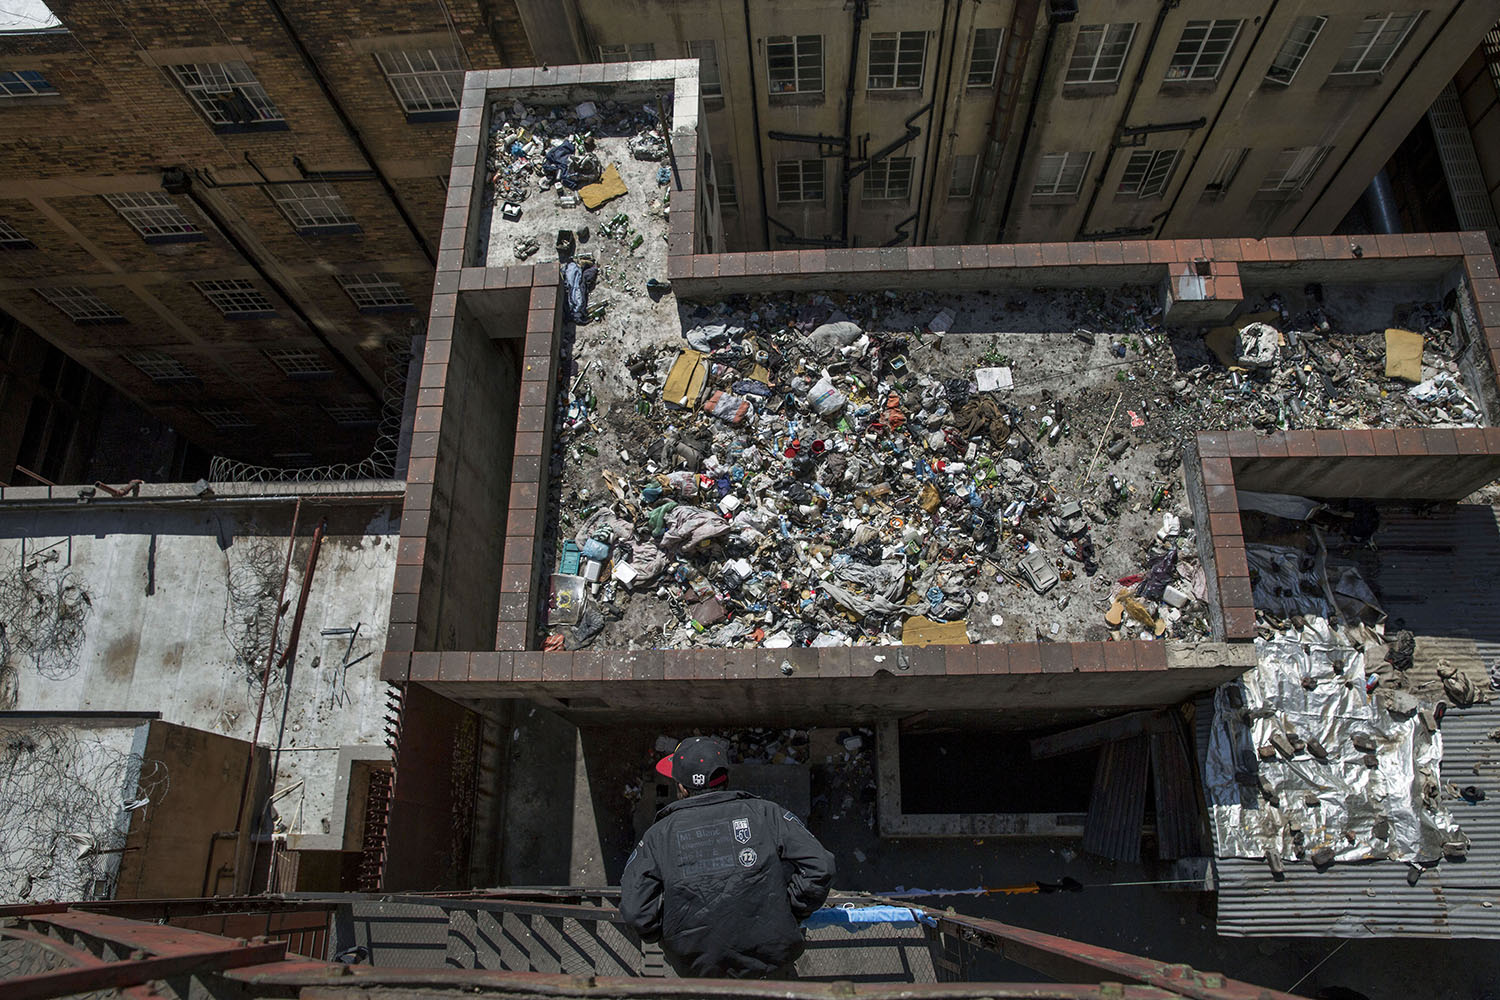 A man looks on to the rubbish filled roof of a derelict building, in the inner city of Johannesburg, Aug. 2, 2015.